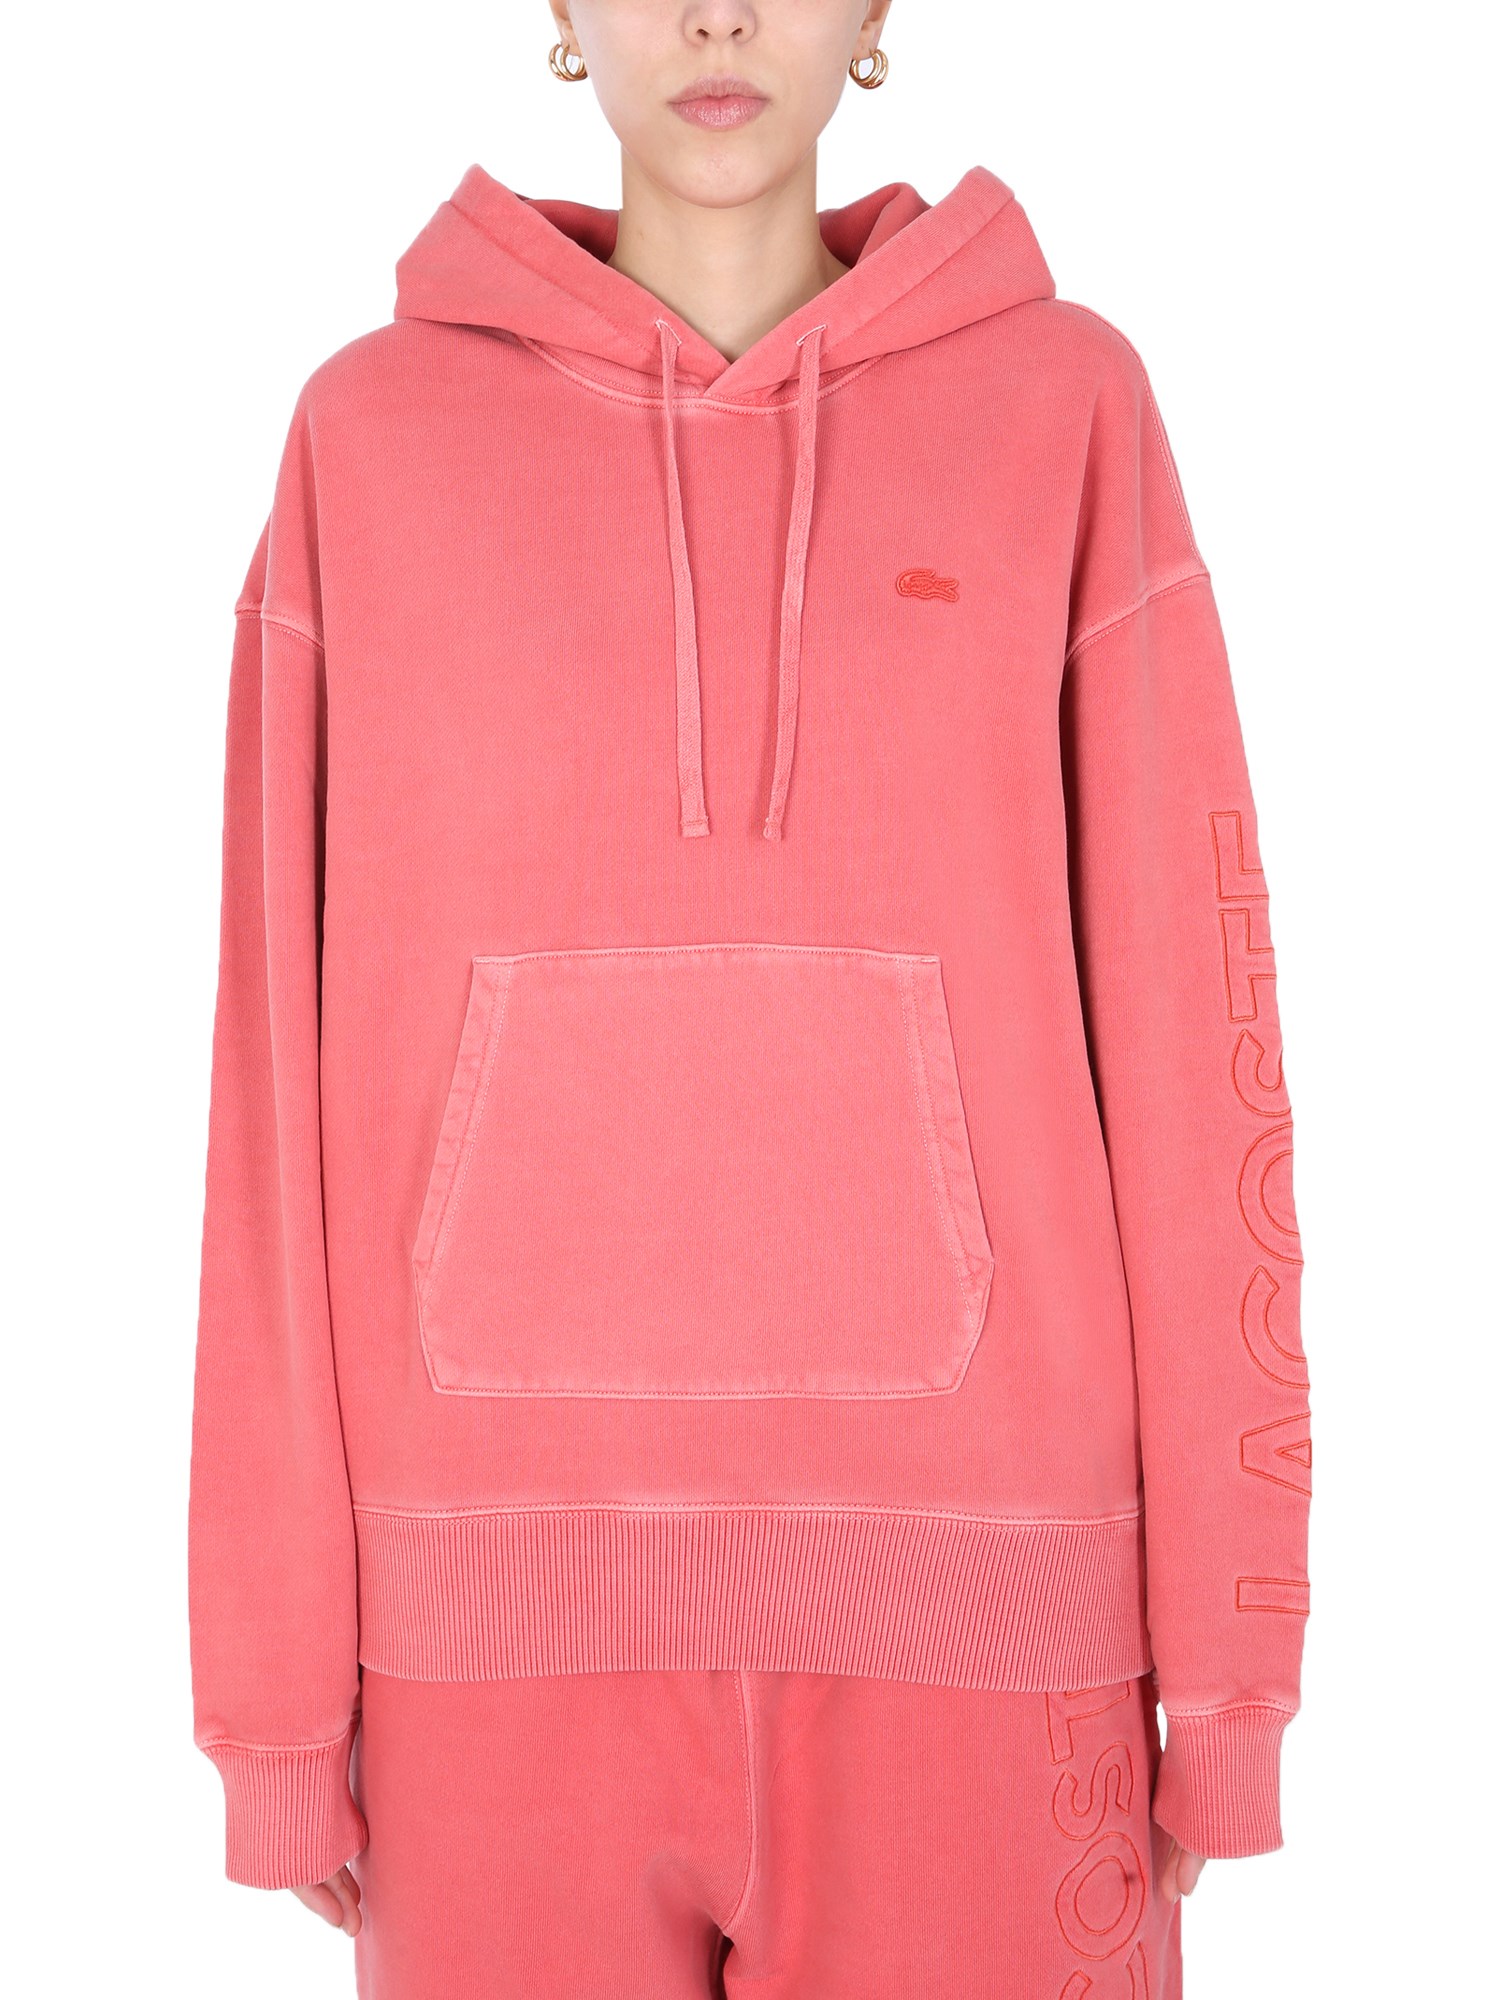 digtere Ren hvede Lacoste Hoodie Unisex In Red | ModeSens